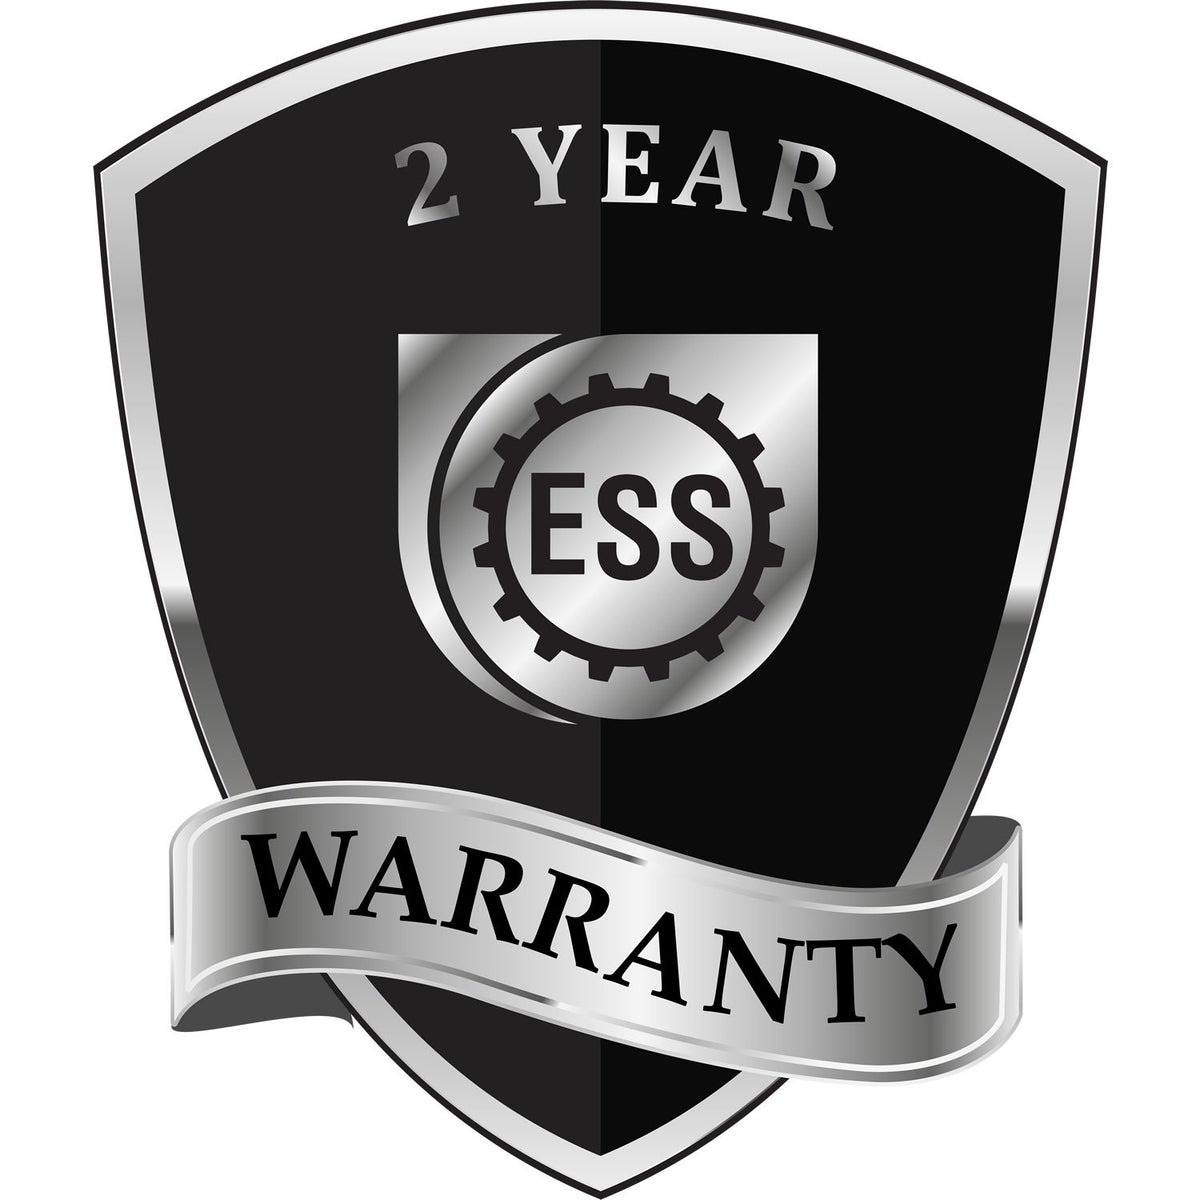 A black and silver badge or emblem showing warranty information for the Gift New Mexico Land Surveyor Seal